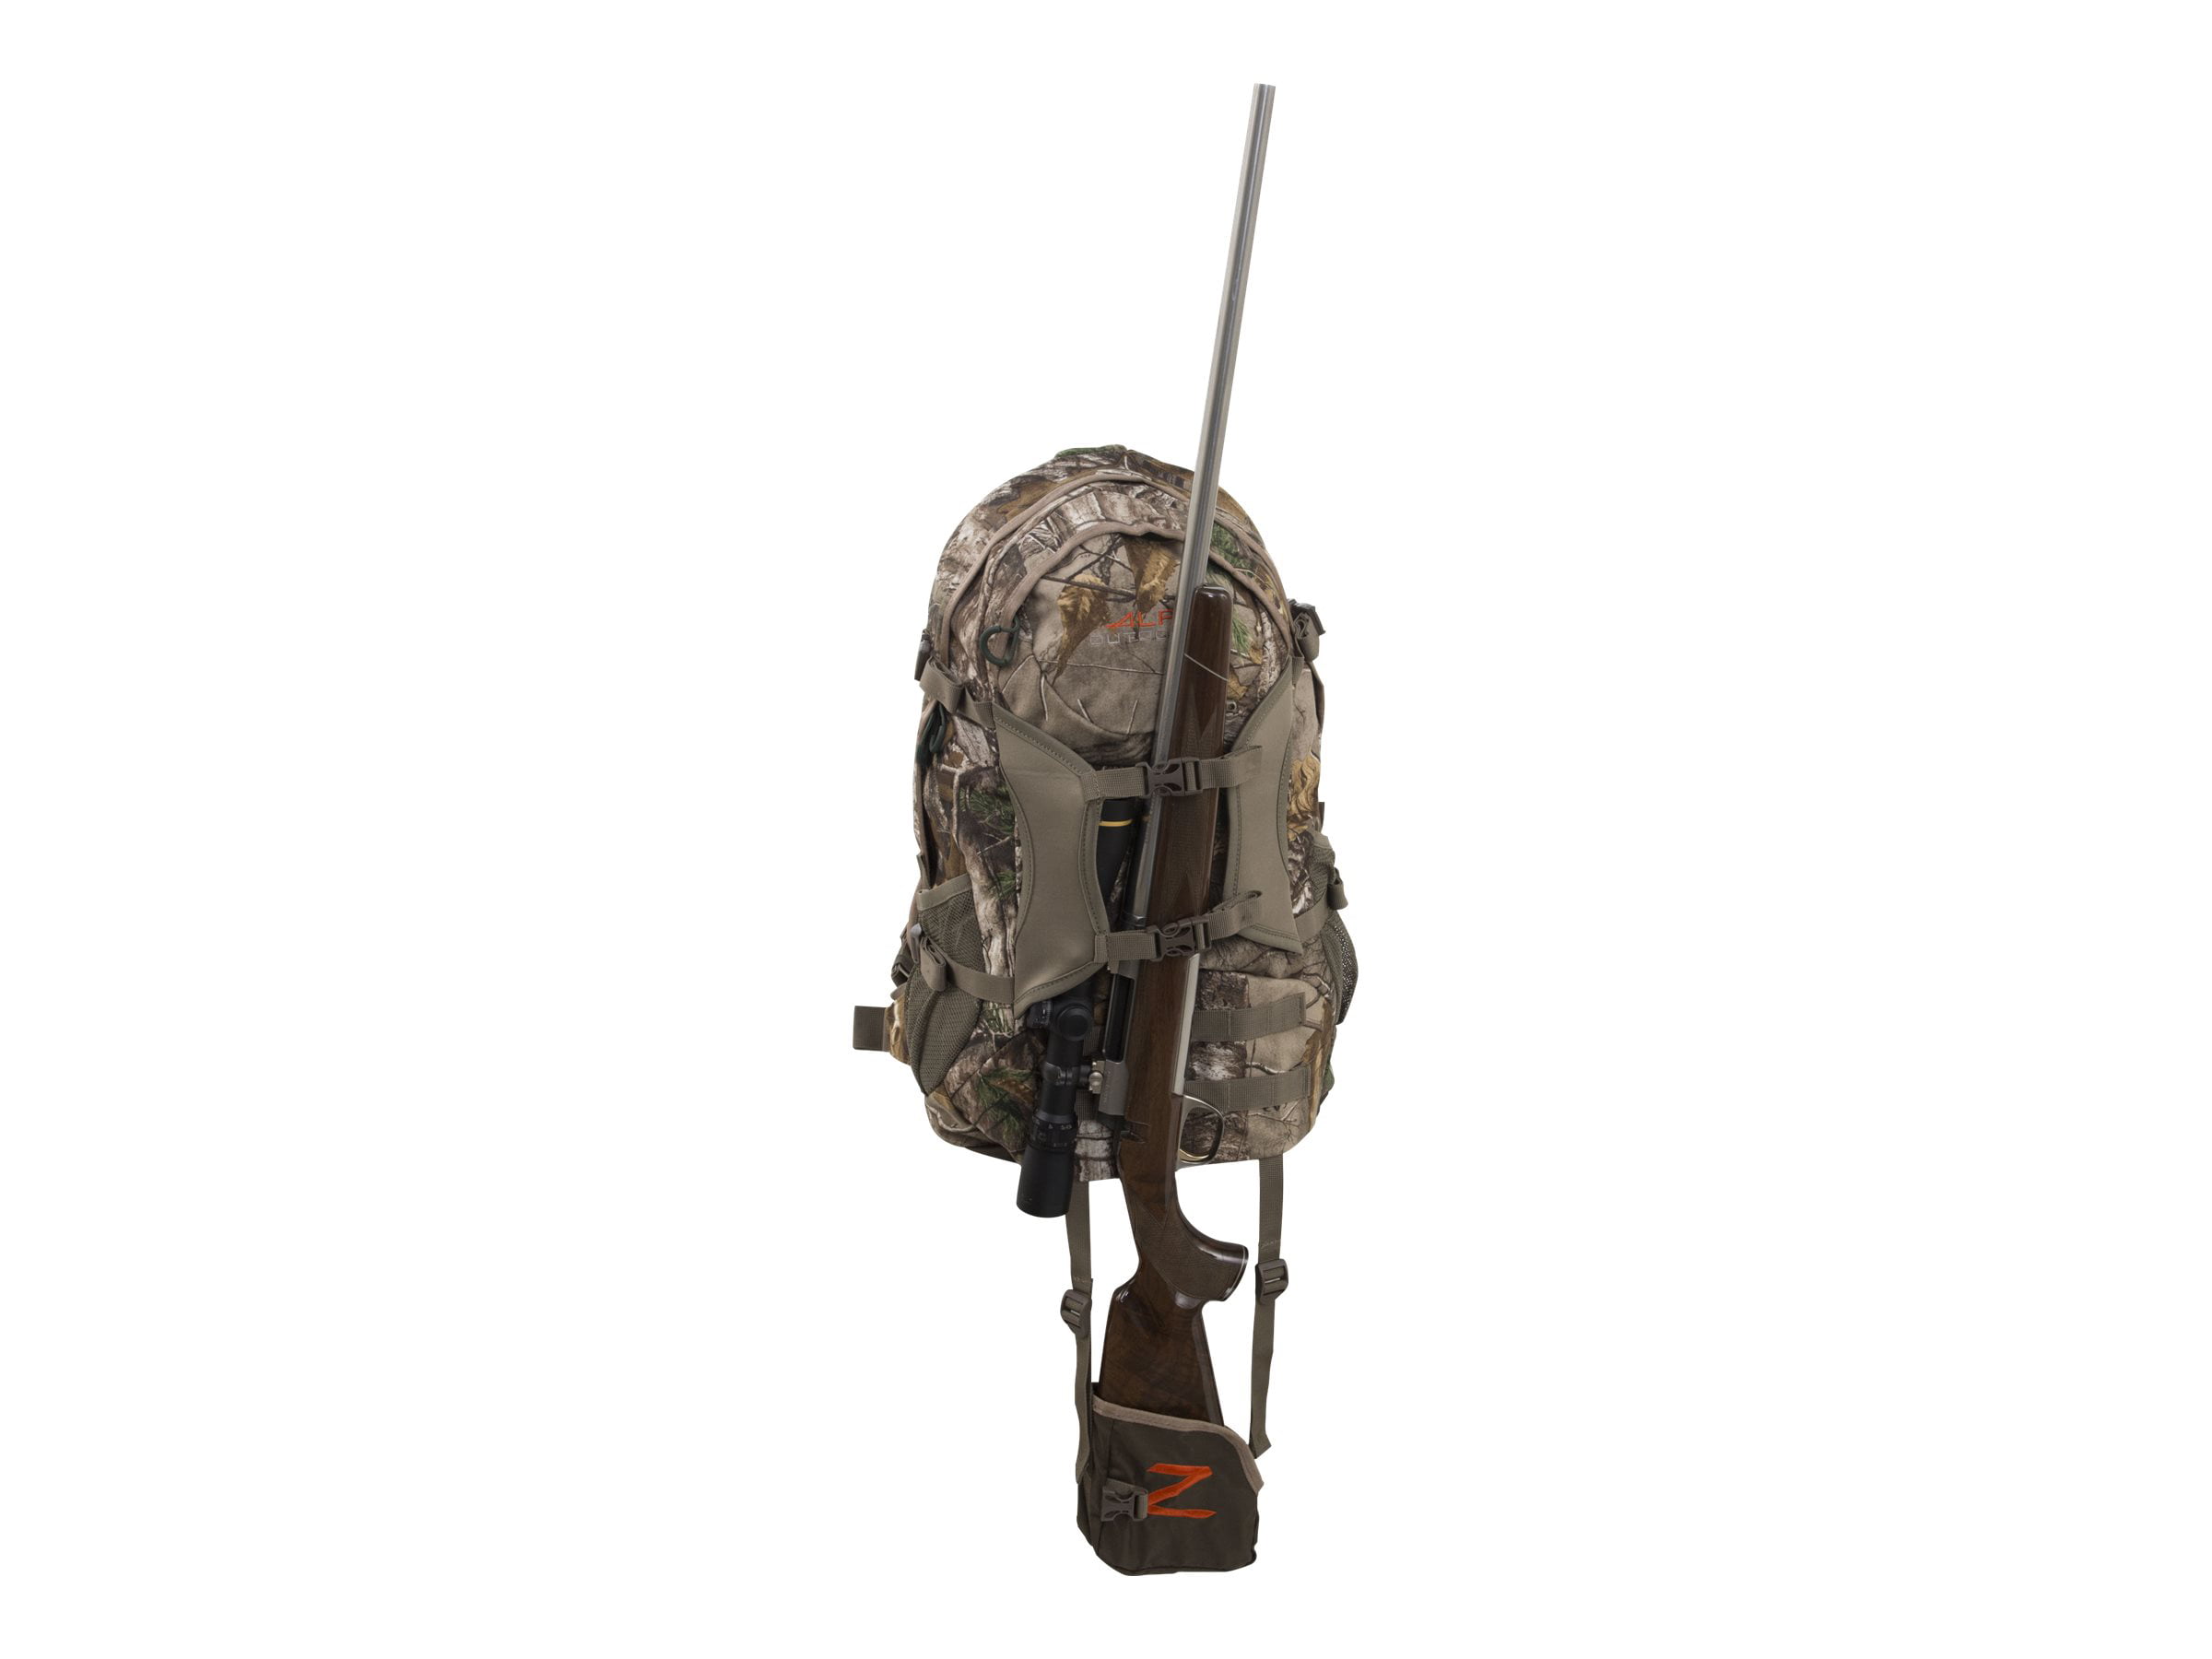 ALPS OutdoorZ Trail Blazer - Backpack for hunting gear - REALTREE XTRA